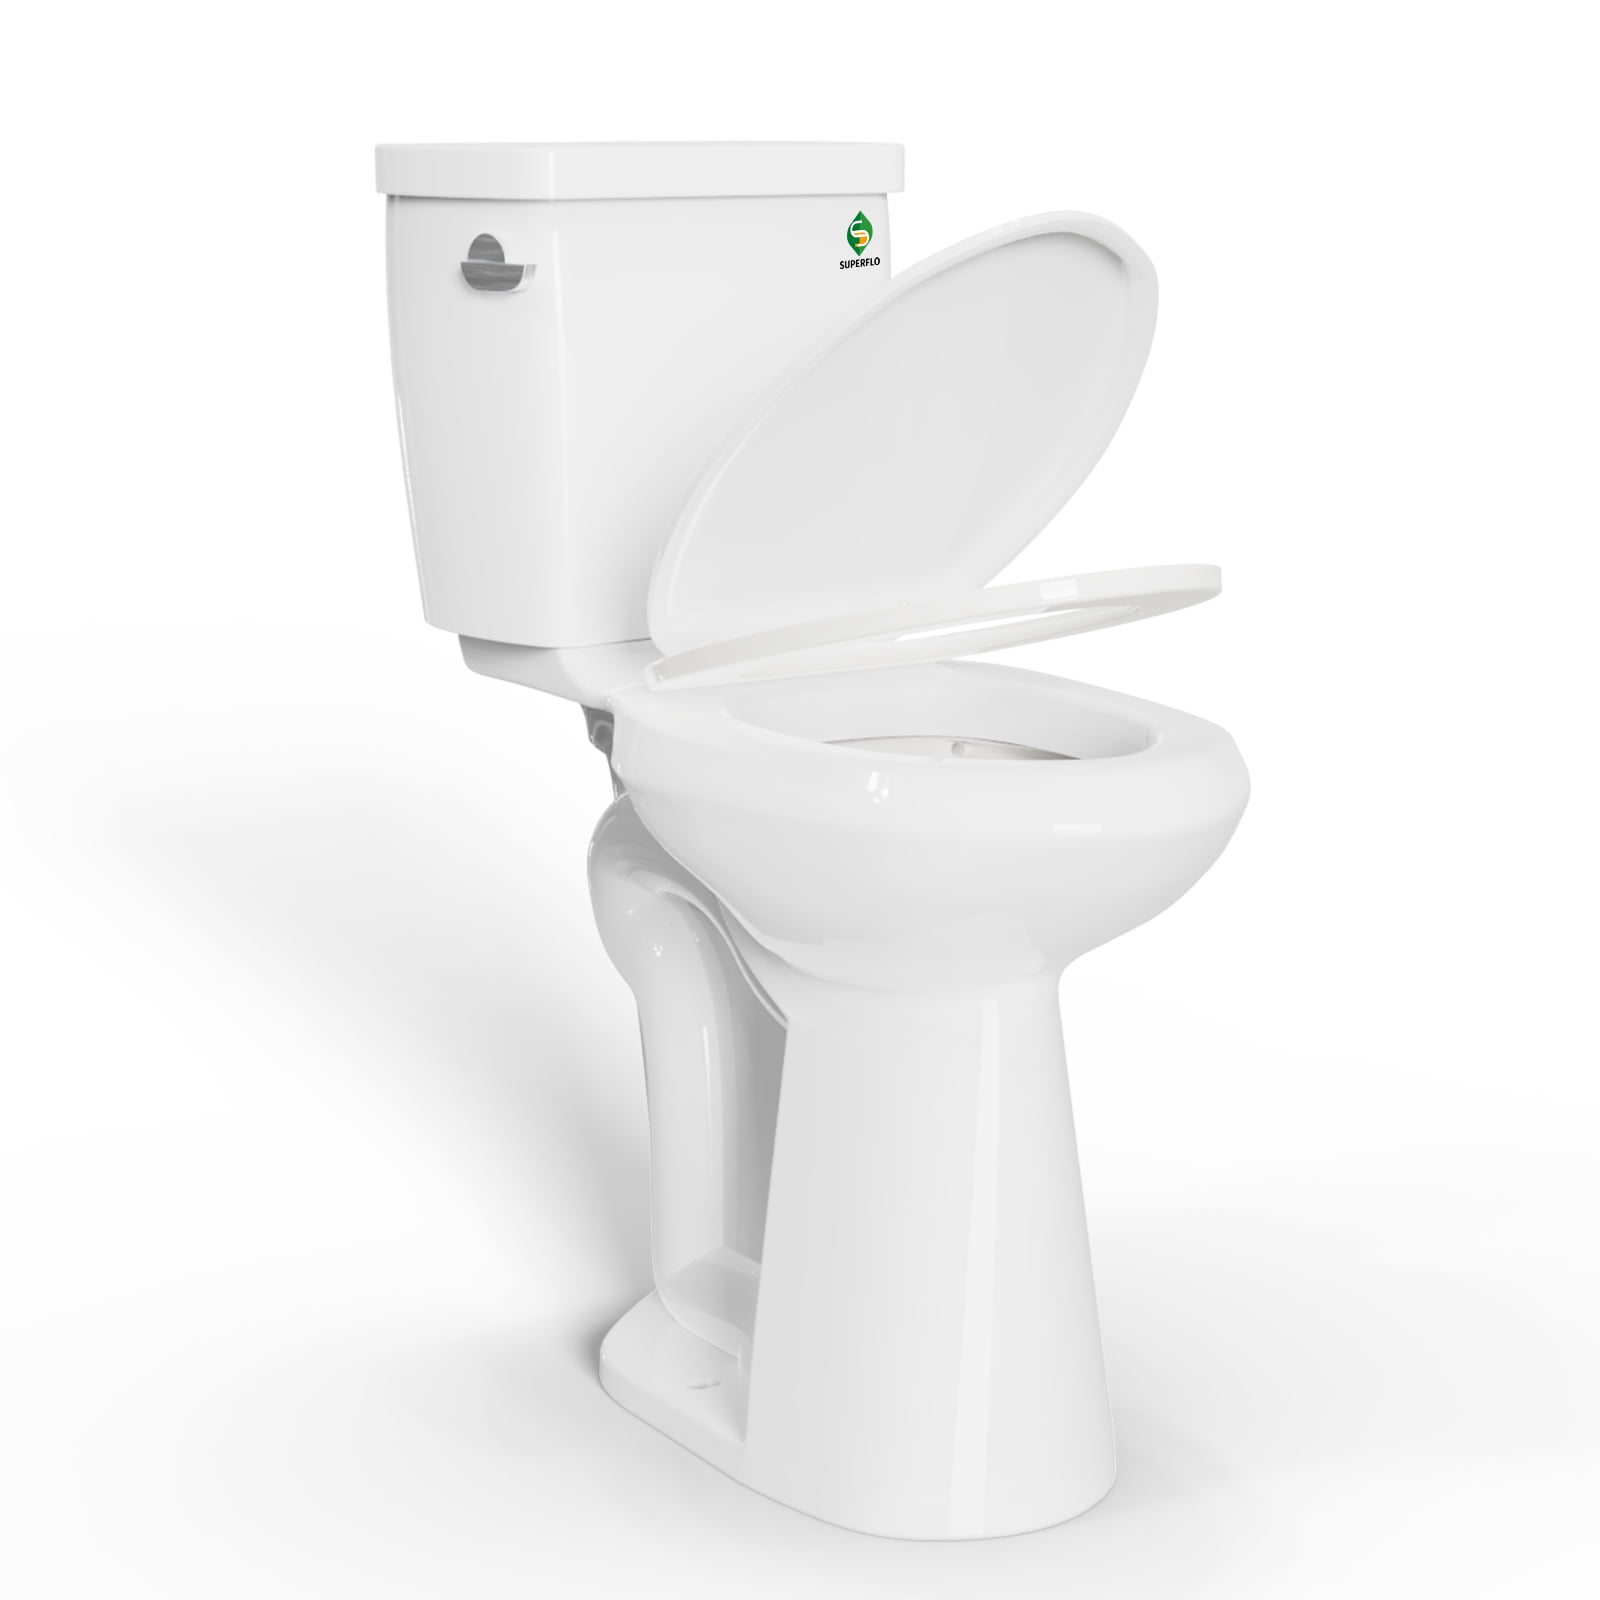 SUPERFLO Extra Tall Toilets, 21 Inch Toilet Bowl Height & 12-inch Rough-in, High Toilets For Seniors & Disabled